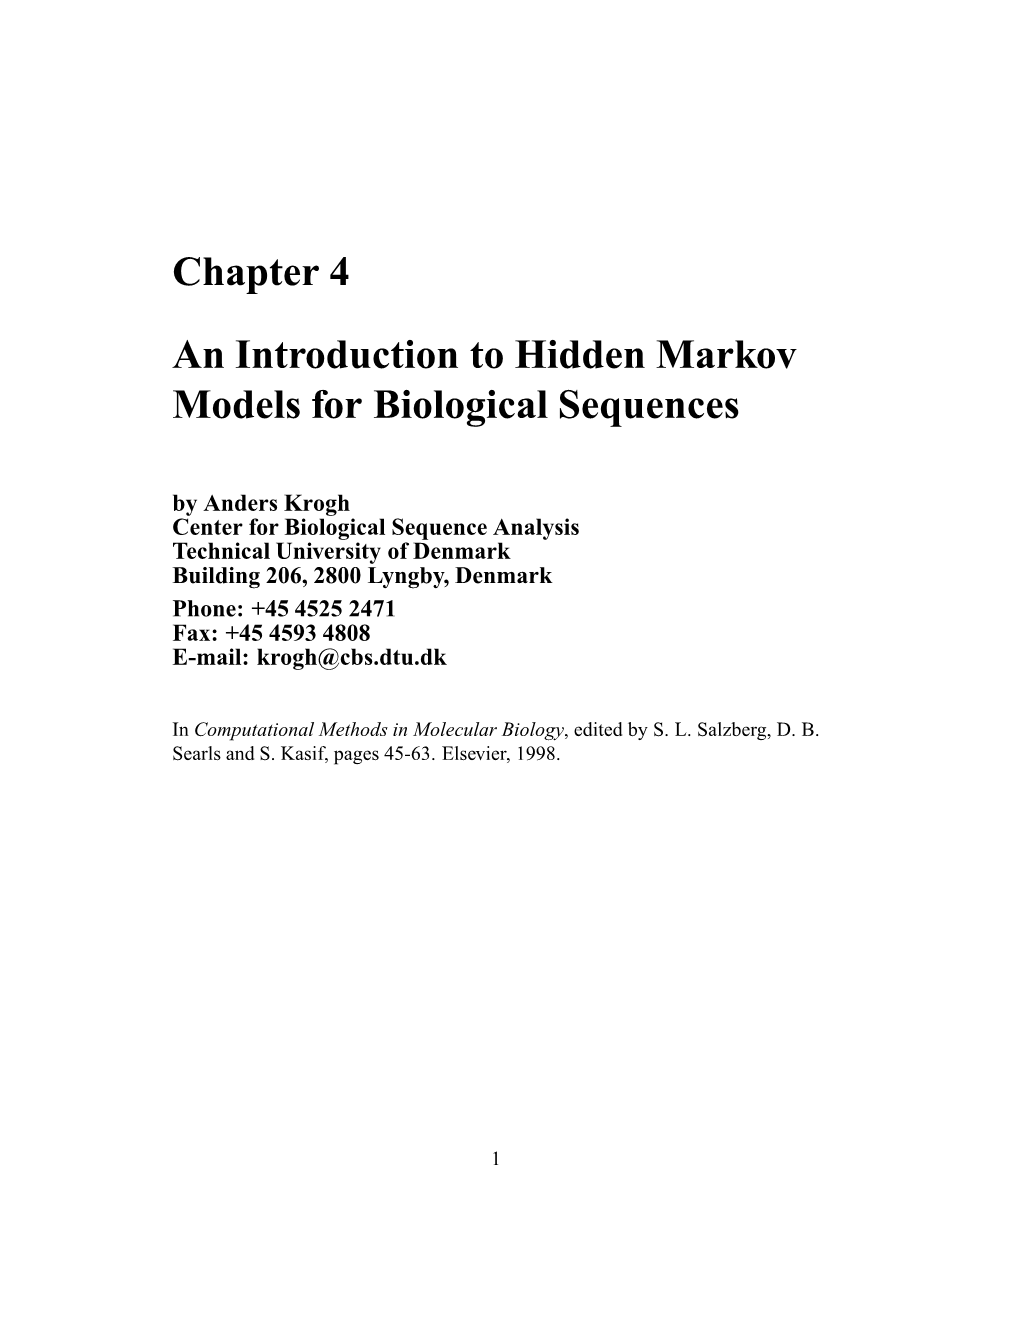 Chapter 4 an Introduction to Hidden Markov Models for Biological